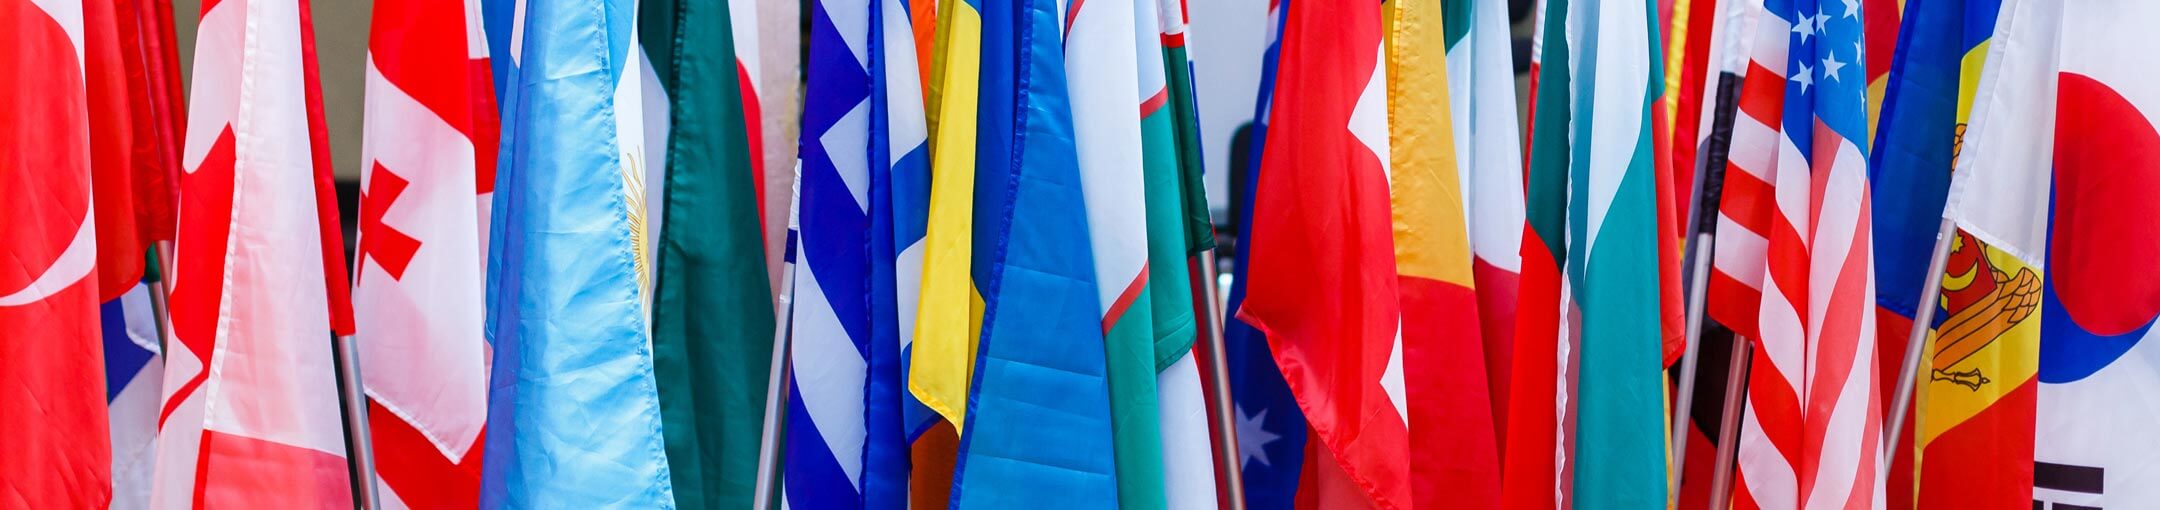 Close up of several different country flags on poles.